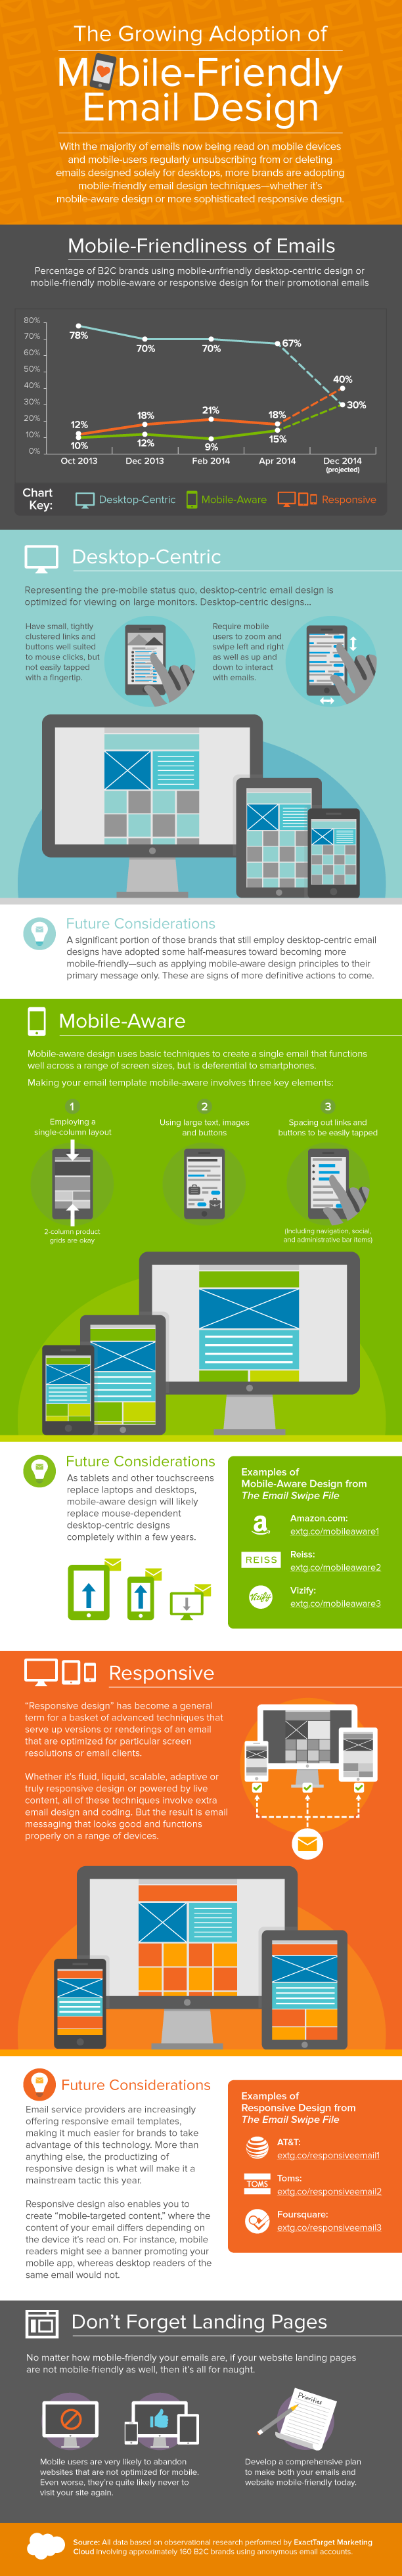 The Growing Adoption of Mobile-Friendly Email Design Infographic